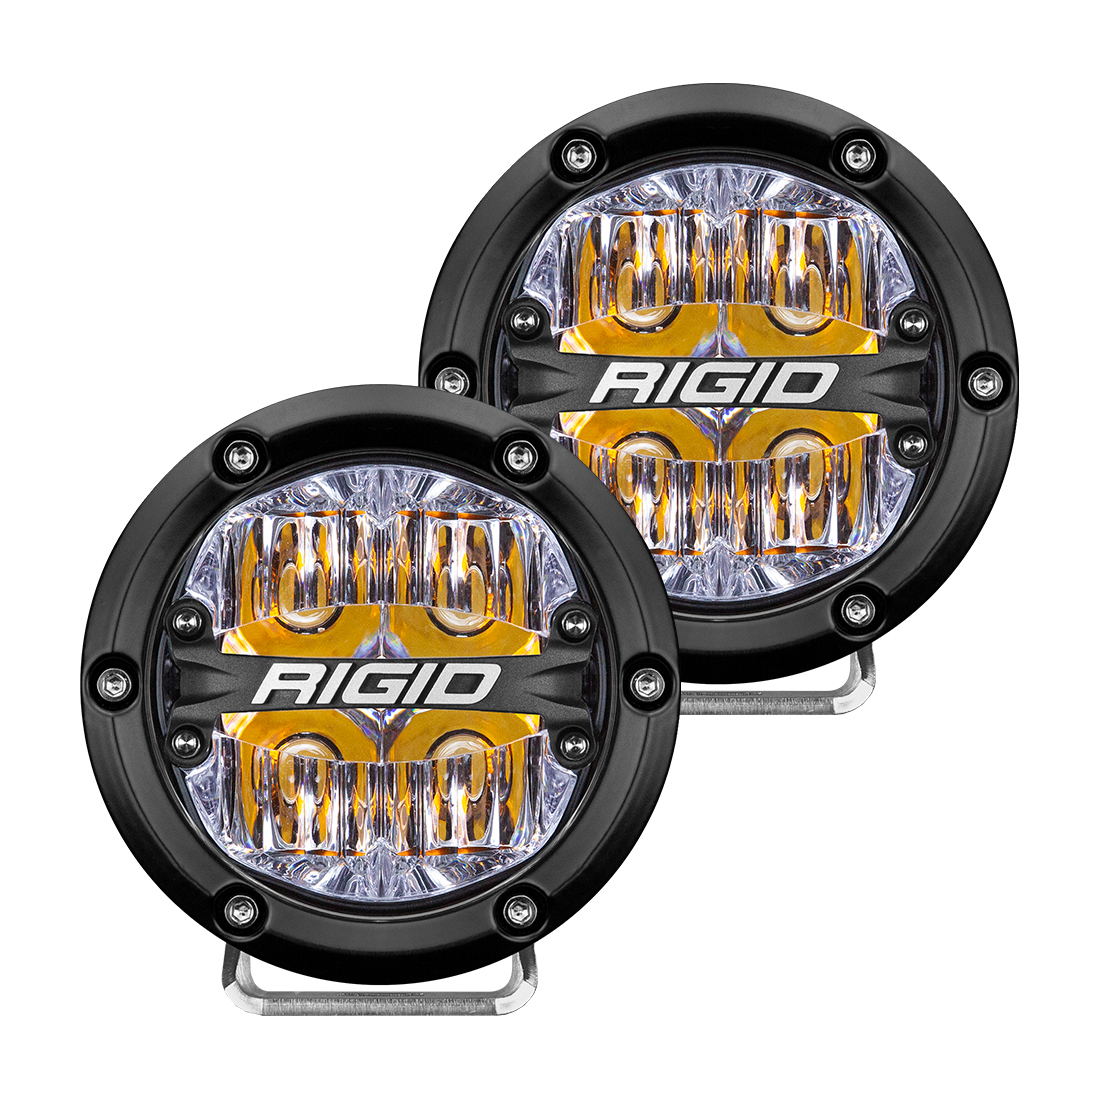 Rigid Industries 360-Series 4 Inch Led Off-Road Drive Beam Amber Backlight Pair - Click Image to Close